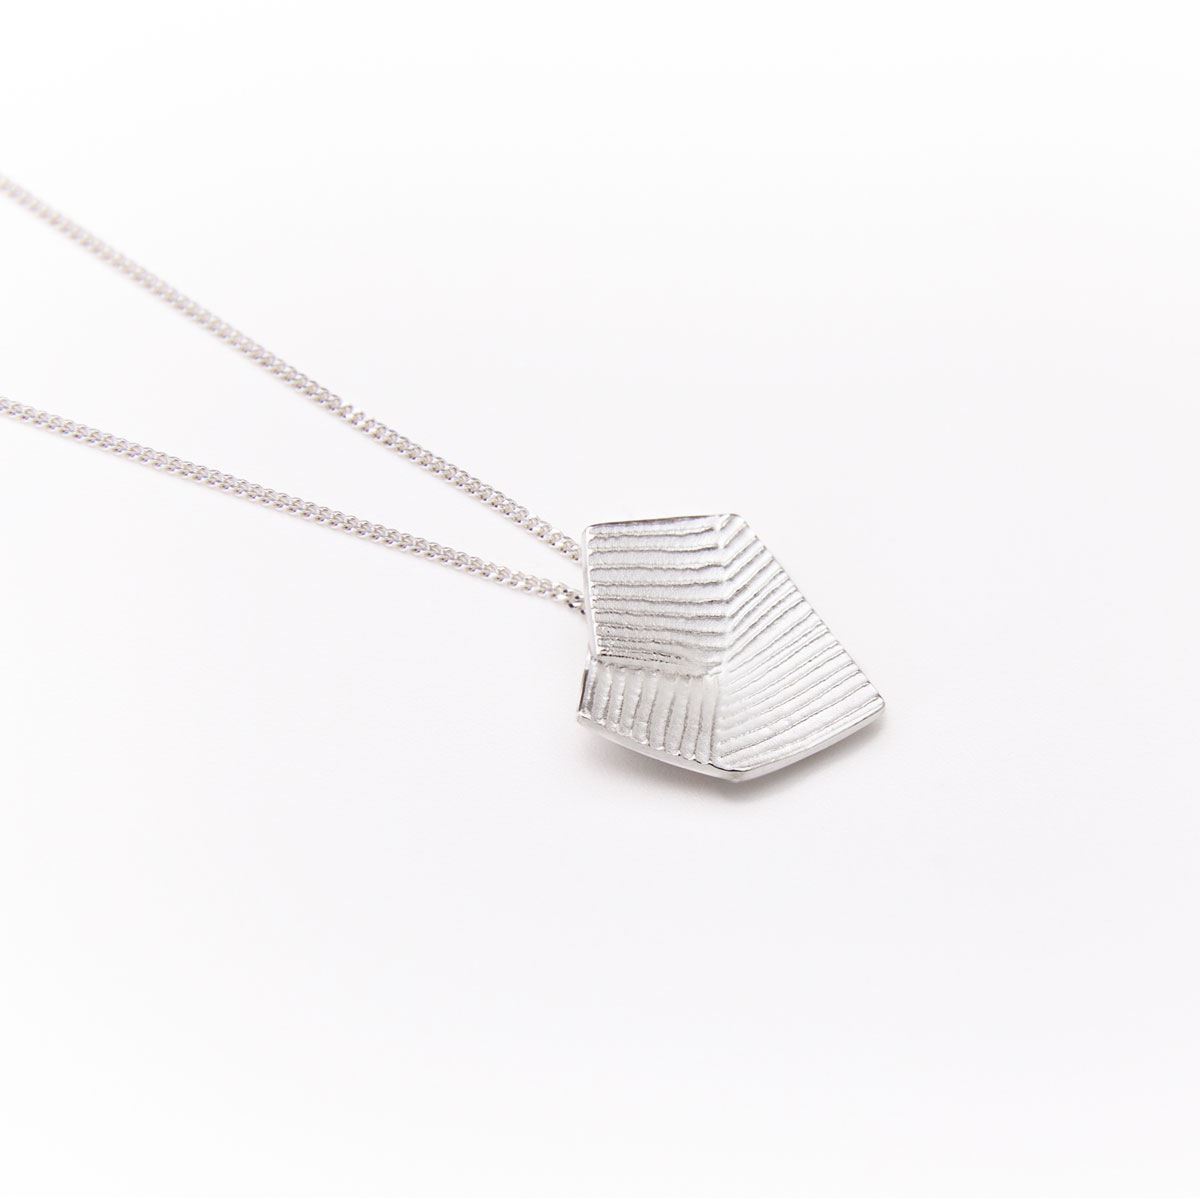 ‘Lines in Motion’ Silver Pendant, Small